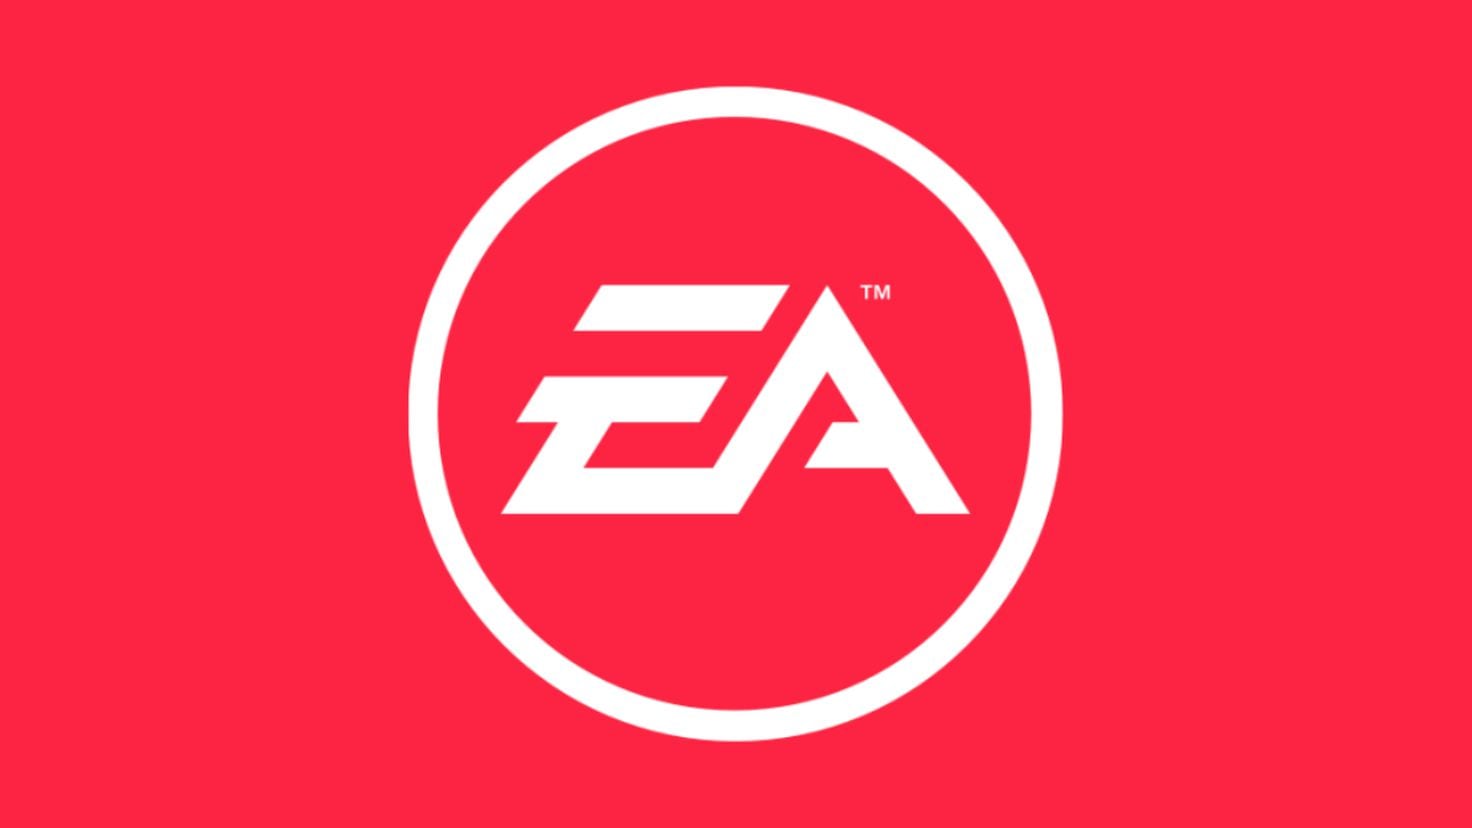 Video games are for everyone: EA encourages inclusion with a variety of accessible technologies